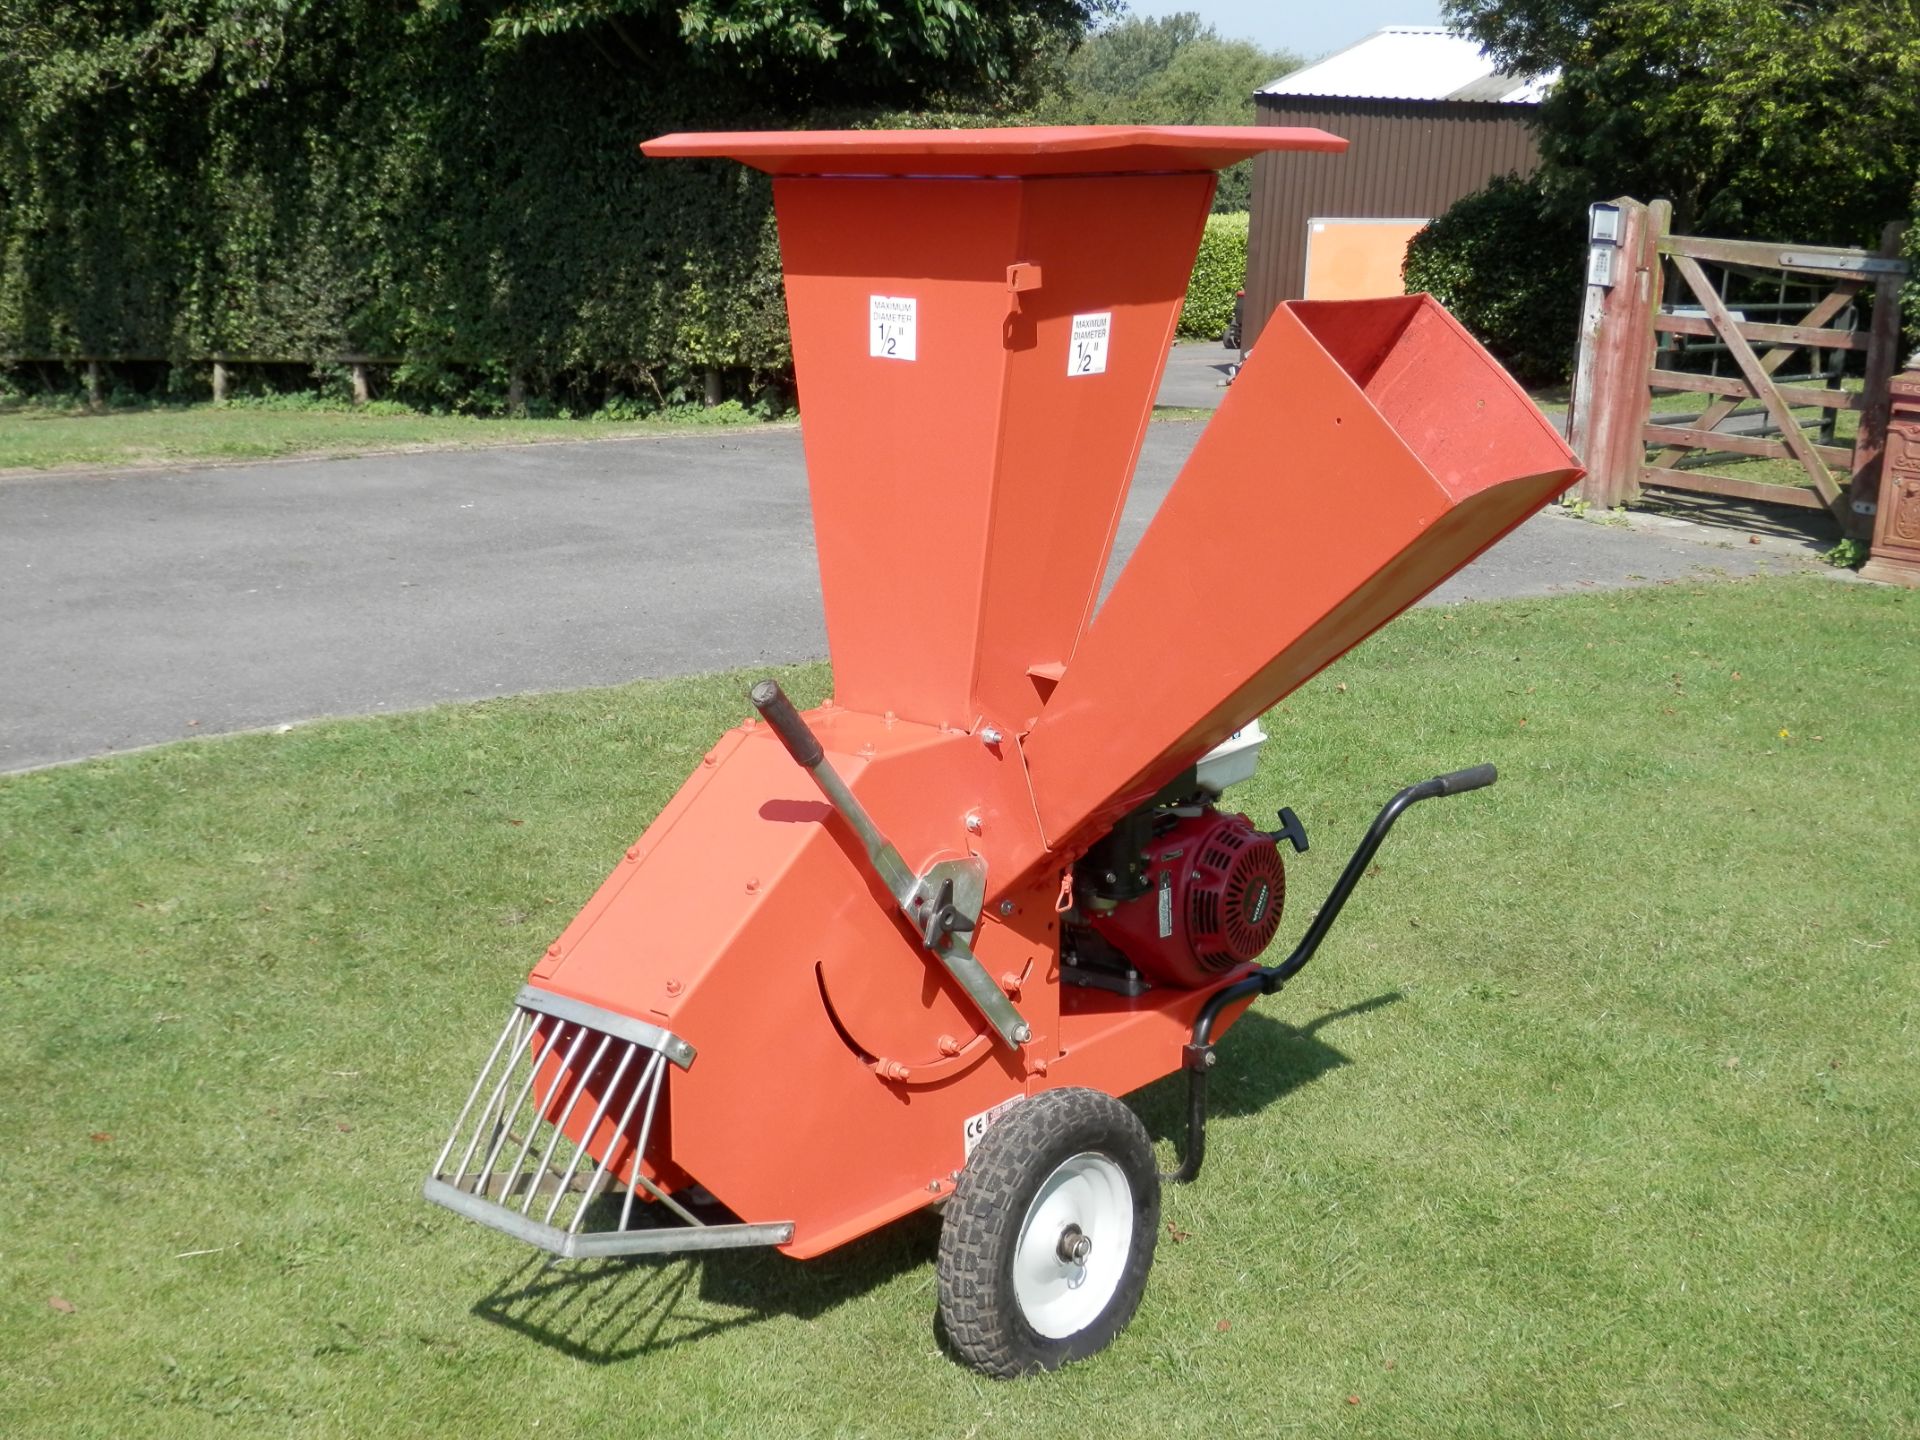 SUPERB CAMON C150 3.5" PETROL POWERED WOOD CHIPPER 13HP HONDA ENGINE, TESTED & WORKING WELL